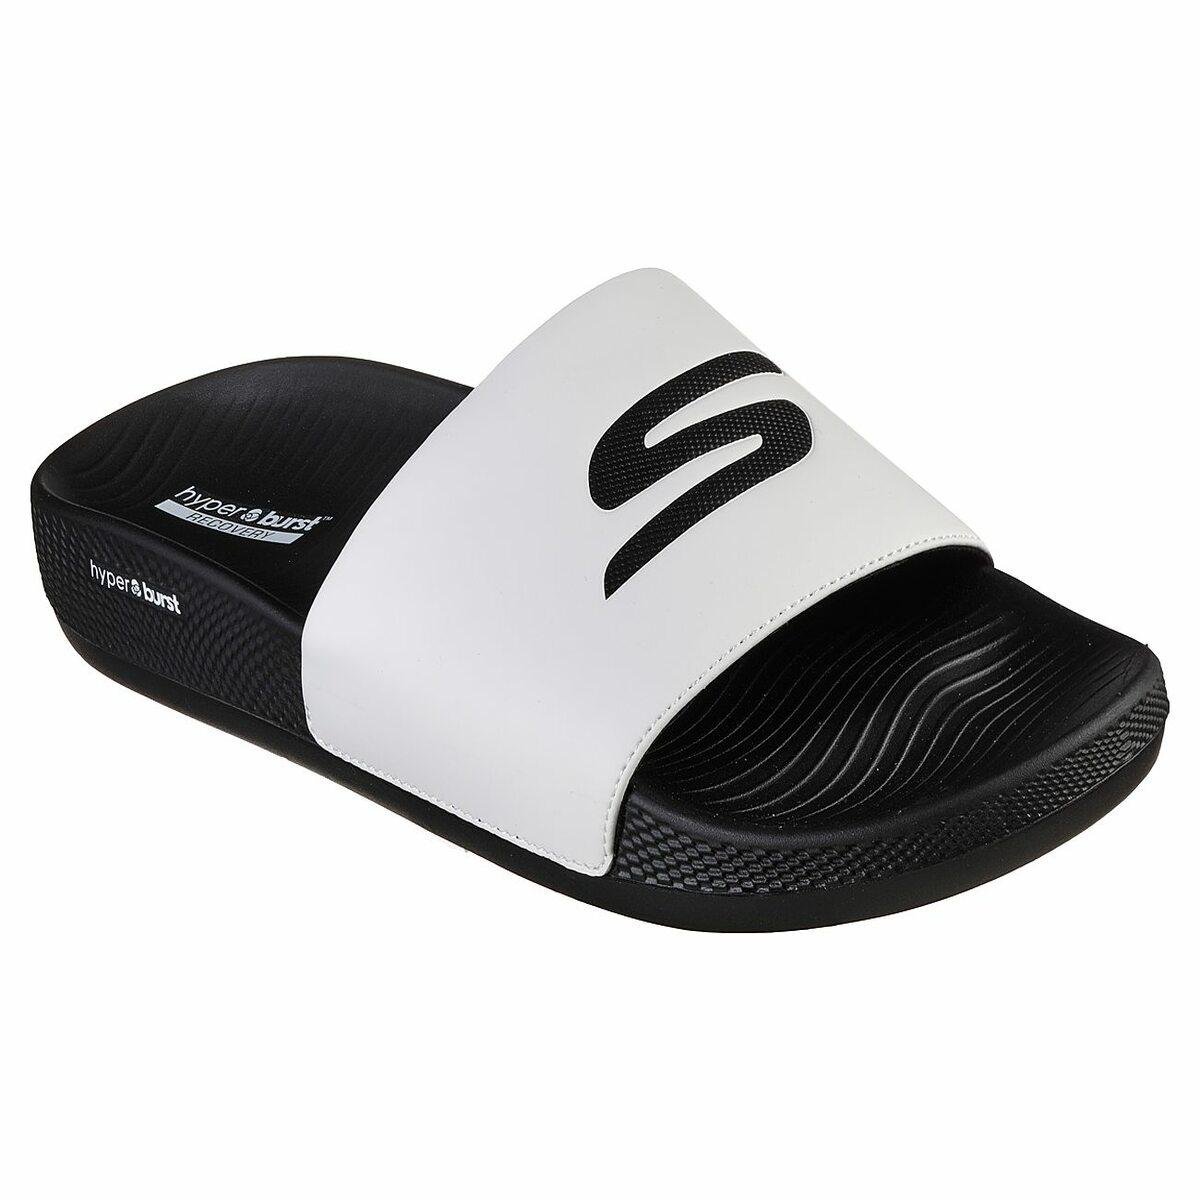 Top more than 184 buy mens slippers online latest